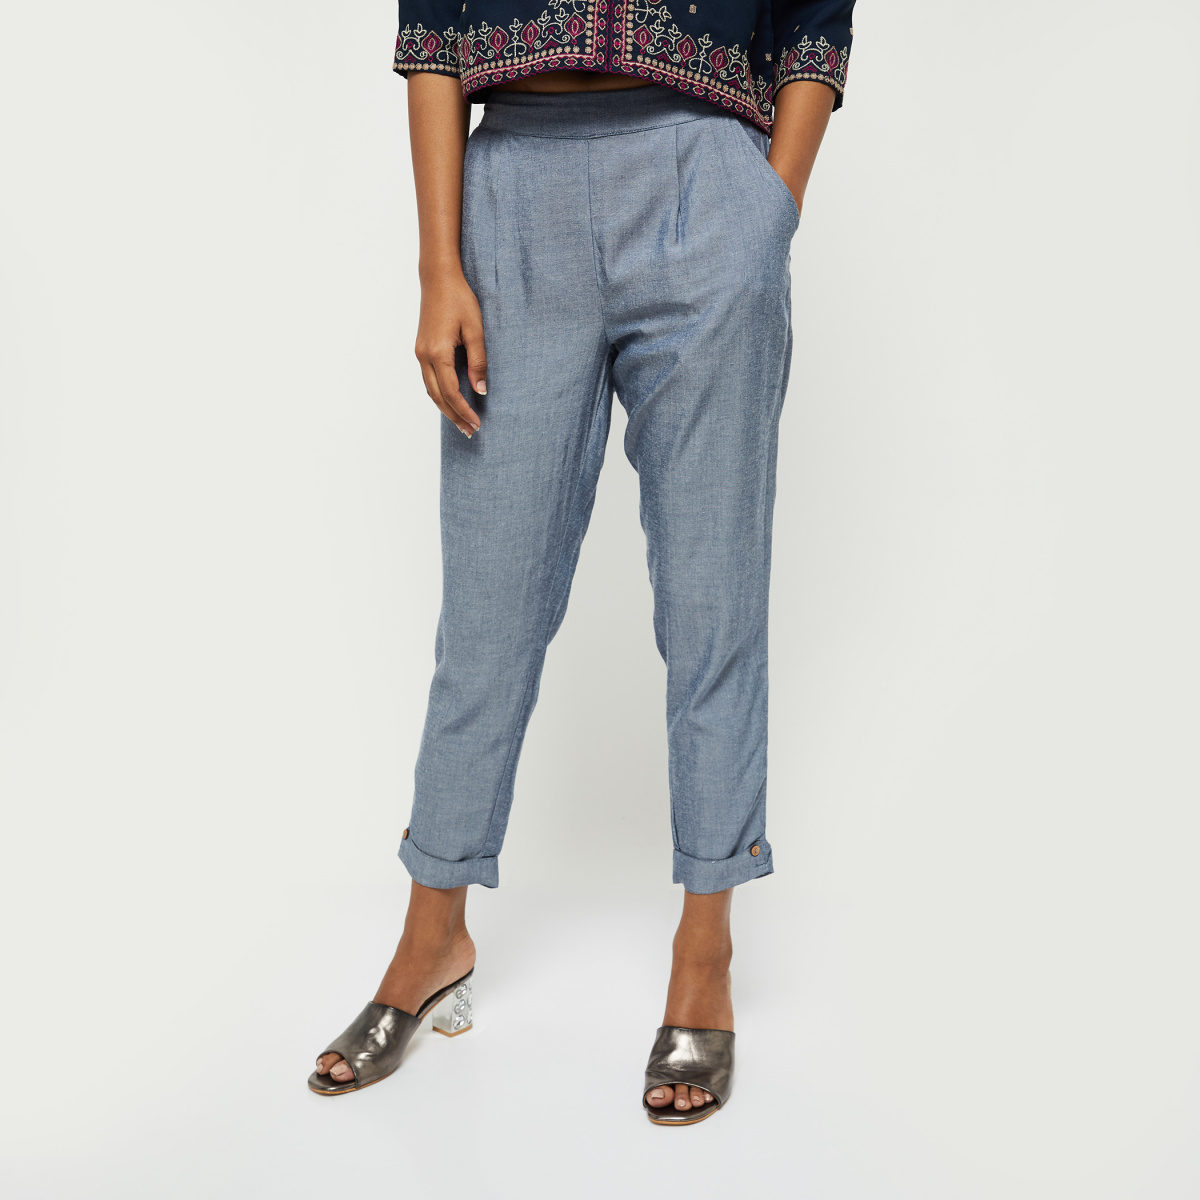 Buy MAX Women Solid Woven Trousers from Max at just INR 9990